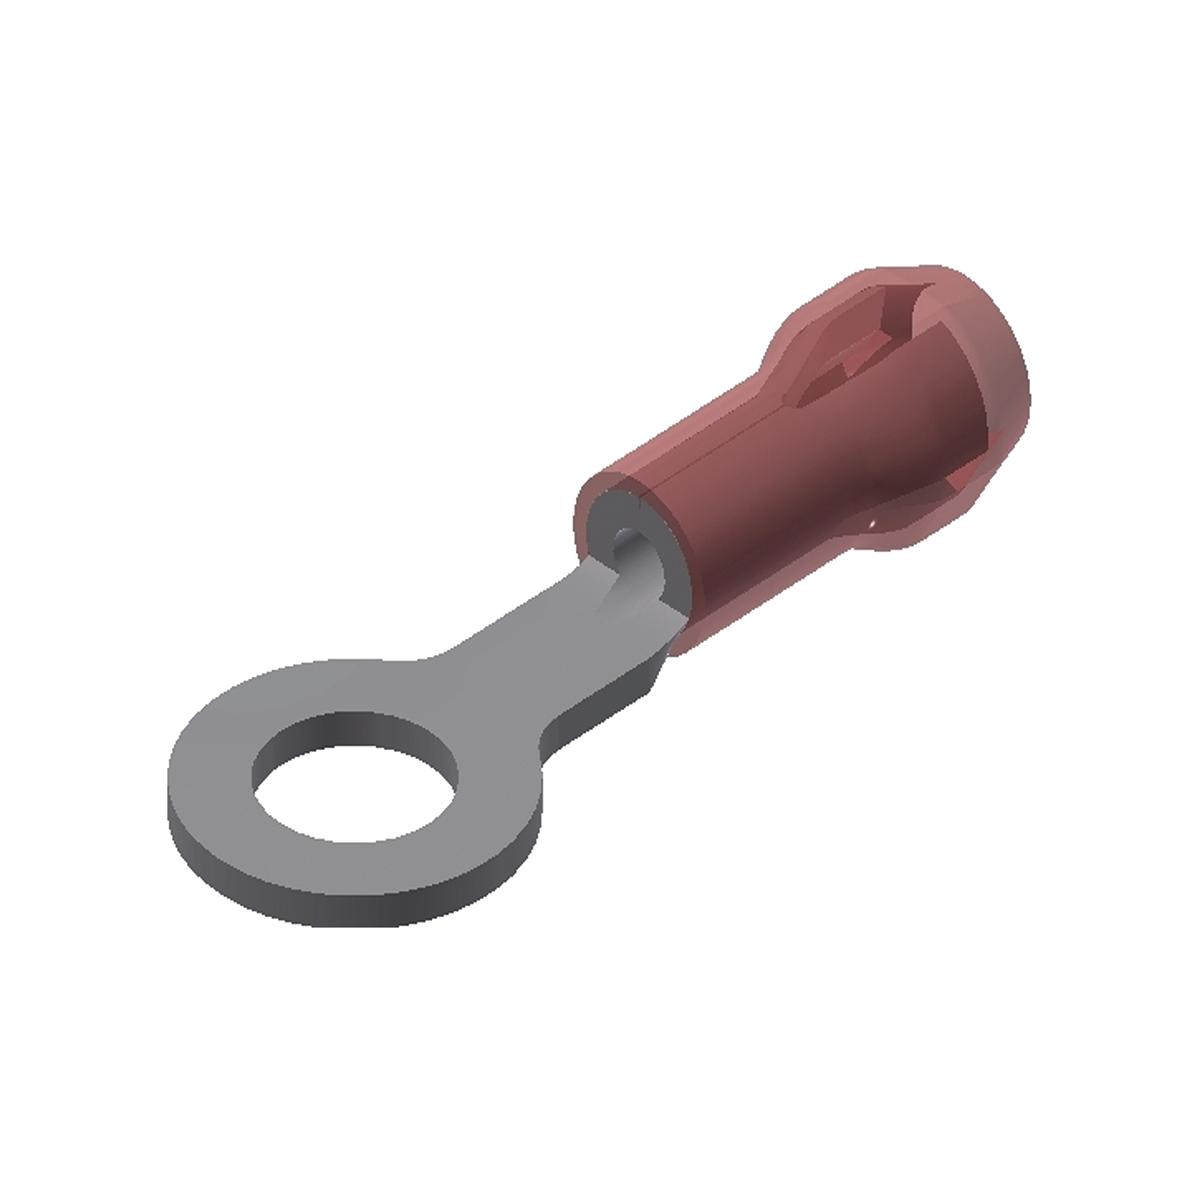 Hubbell YAE18N24 Nylon Ring Terminal For 22 - 18 AWG.  ; Features: INSULUG Type YAE-N Nylon Insulated Terminals Are Designed With A Multi finger Insulation Grip For Paper, EPR And Other Elastic Or Hard To Grip Insulations, The Metal Fingers Firmly Grip The Insulation Prov